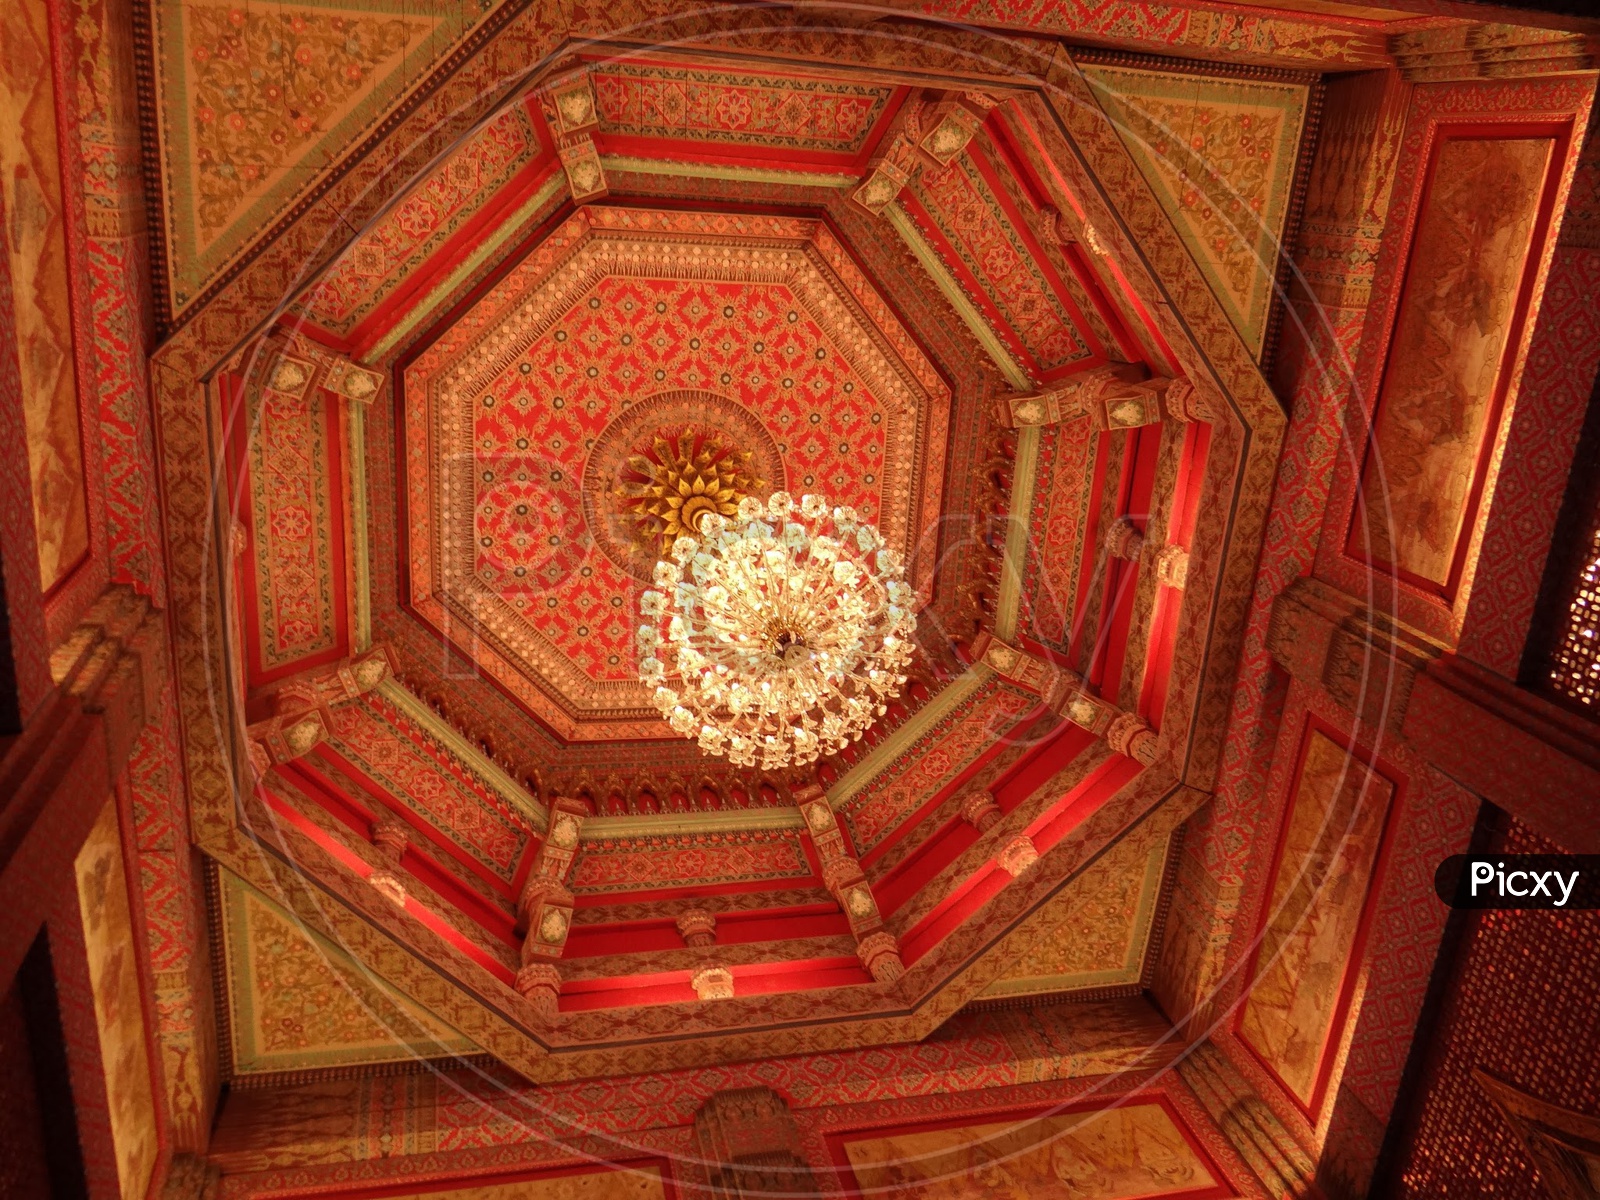 Art in the ceiling of the temple